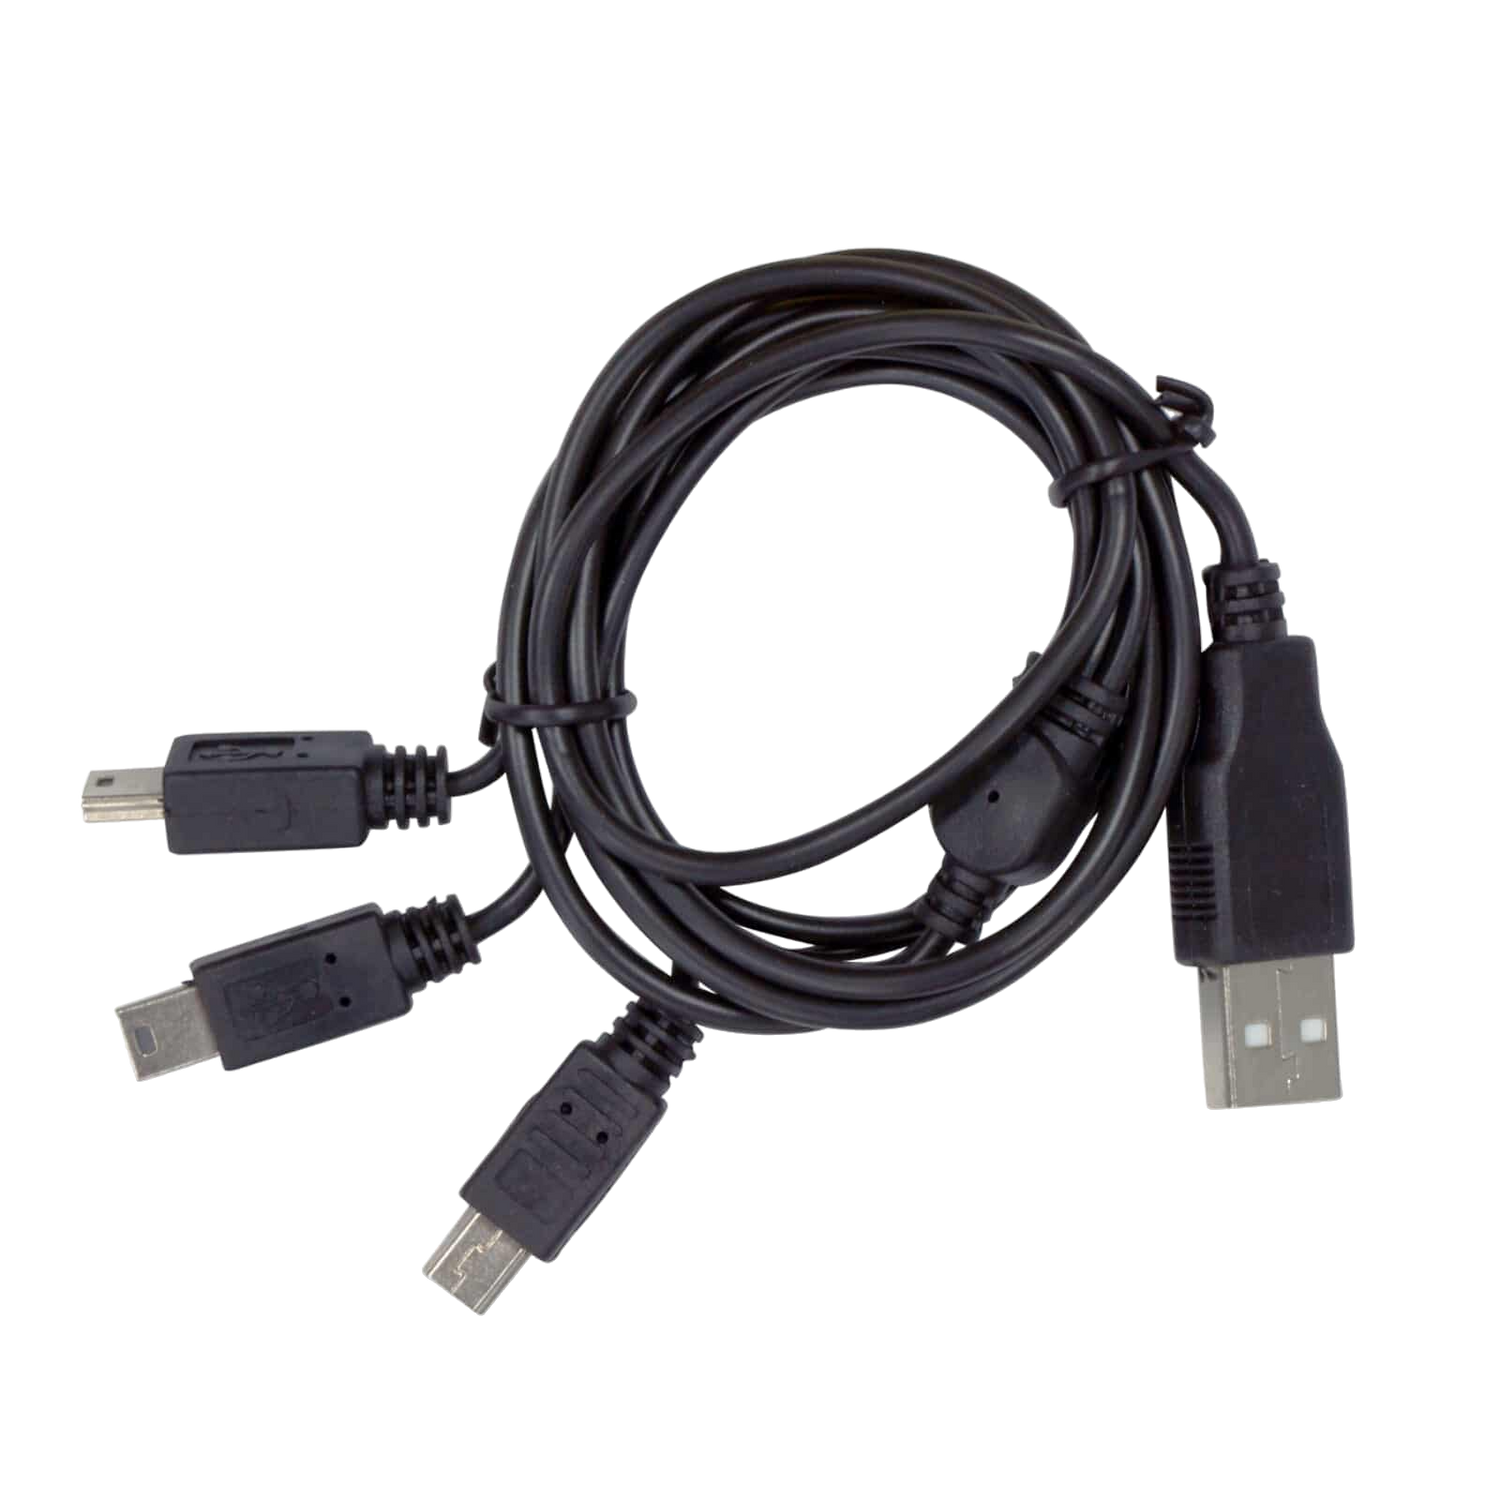 USB 1-3 Charge Cable for Deus and ORX